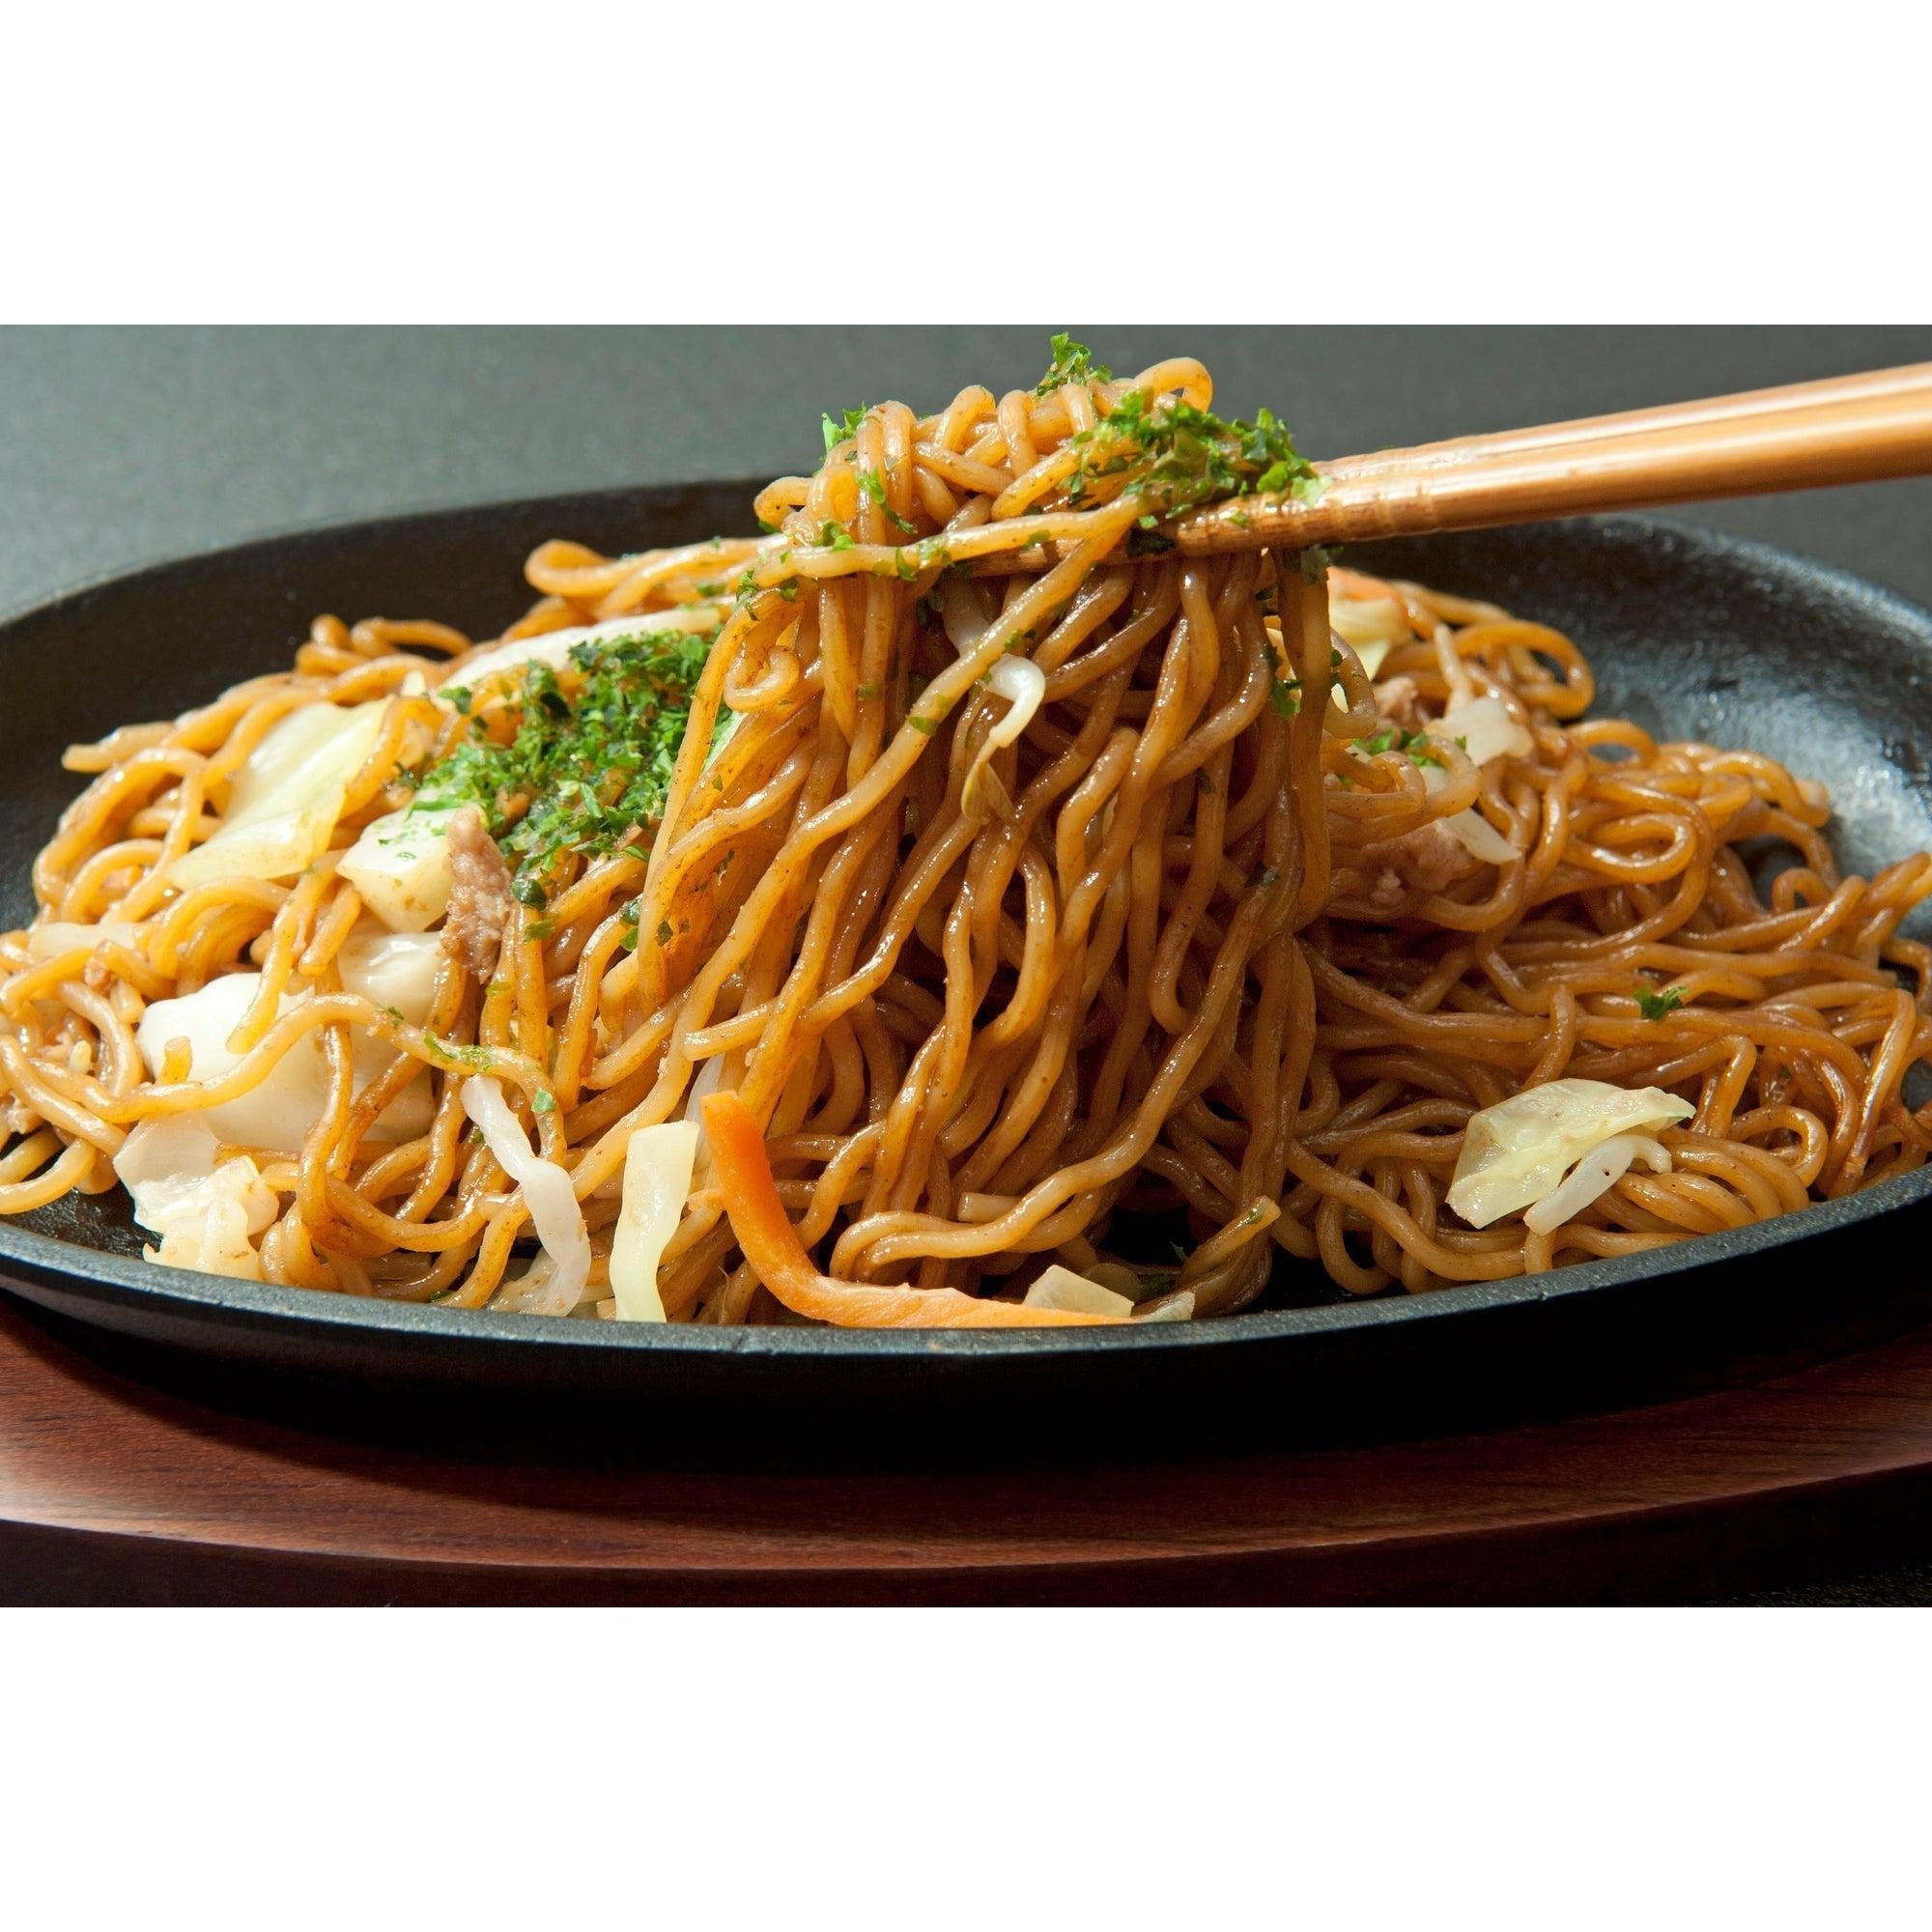 https://cdn.shopify.com/s/files/1/0695/5712/5440/files/P-2-IKNG-YKBPLA-1-Ikenaga_20Cast_20Iron_20Yakisoba_20Plate_20Sizzling_20Plate_20With_20Wooden_20Stand.jpg?v=1696493518